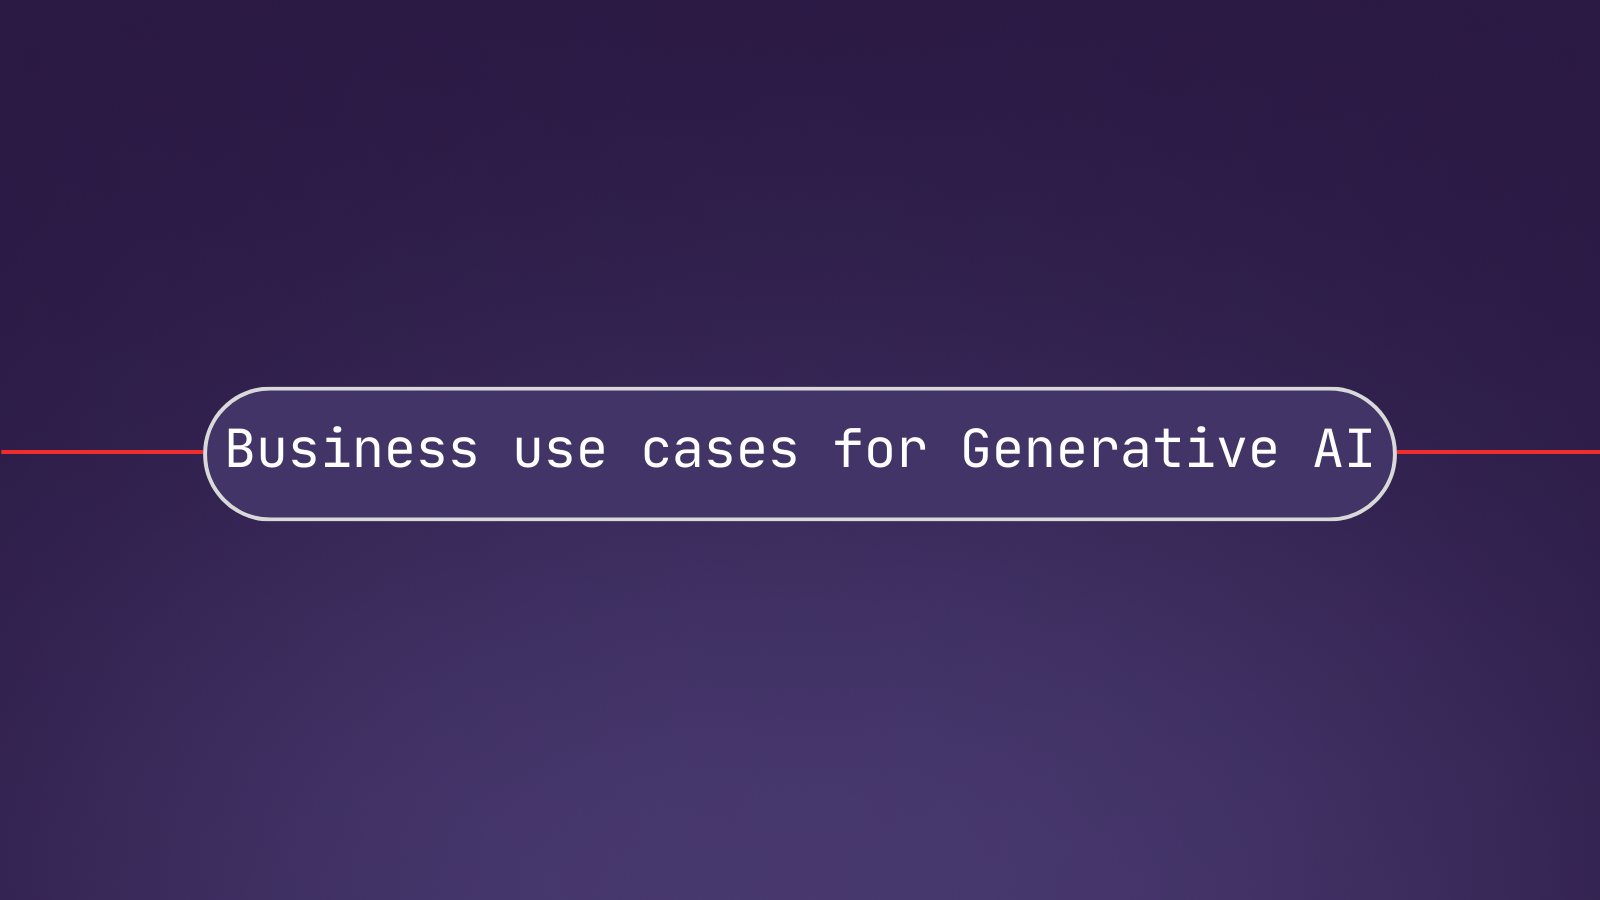 Business use cases for Generative AI